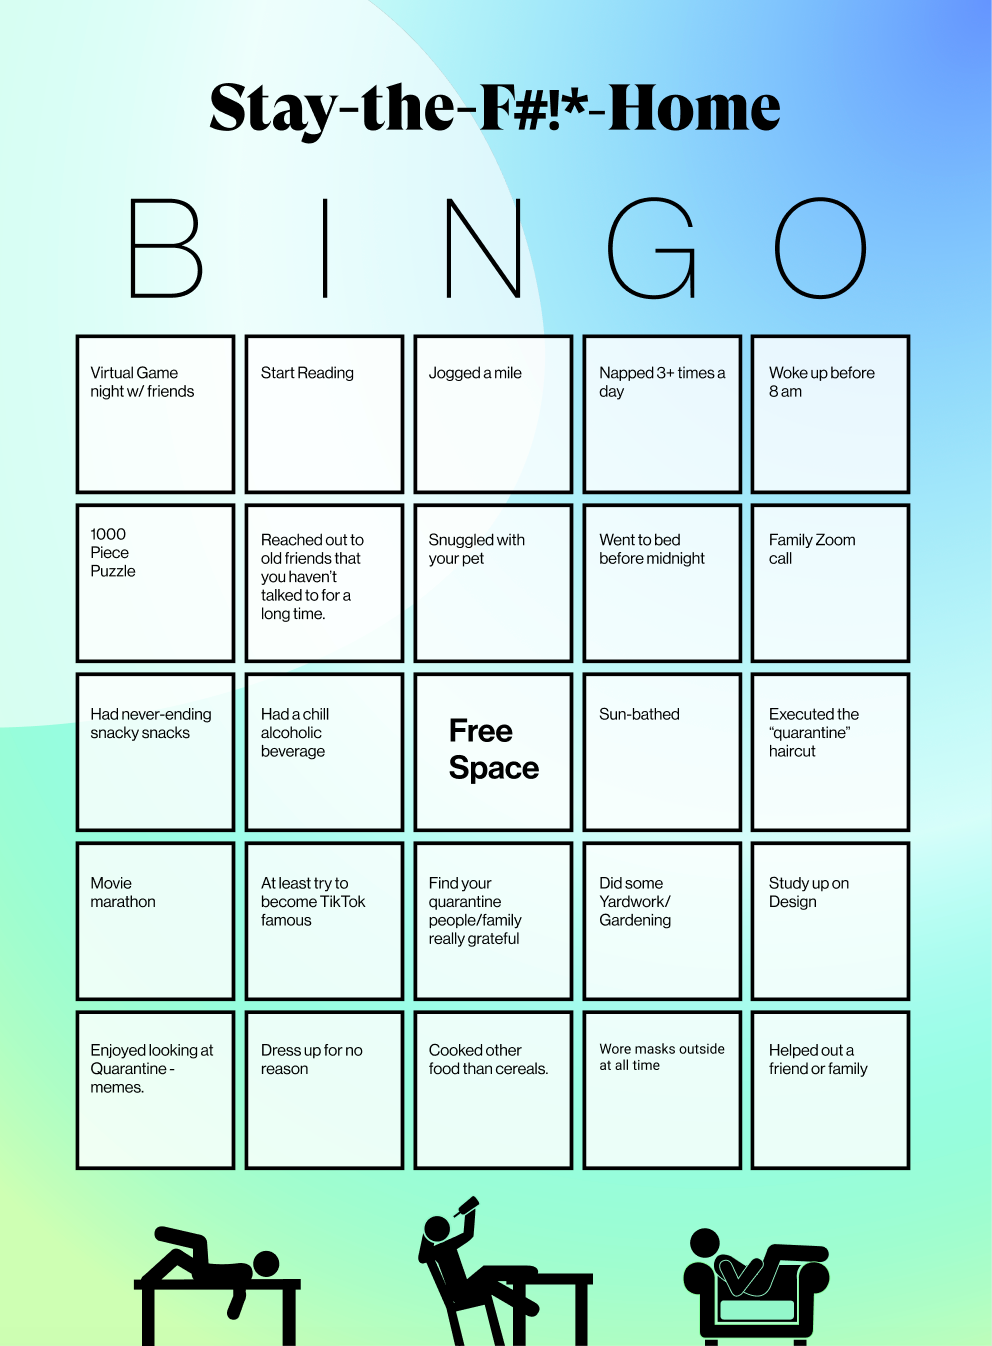 You as a persuader – Stay-the-F***-Home Bingo